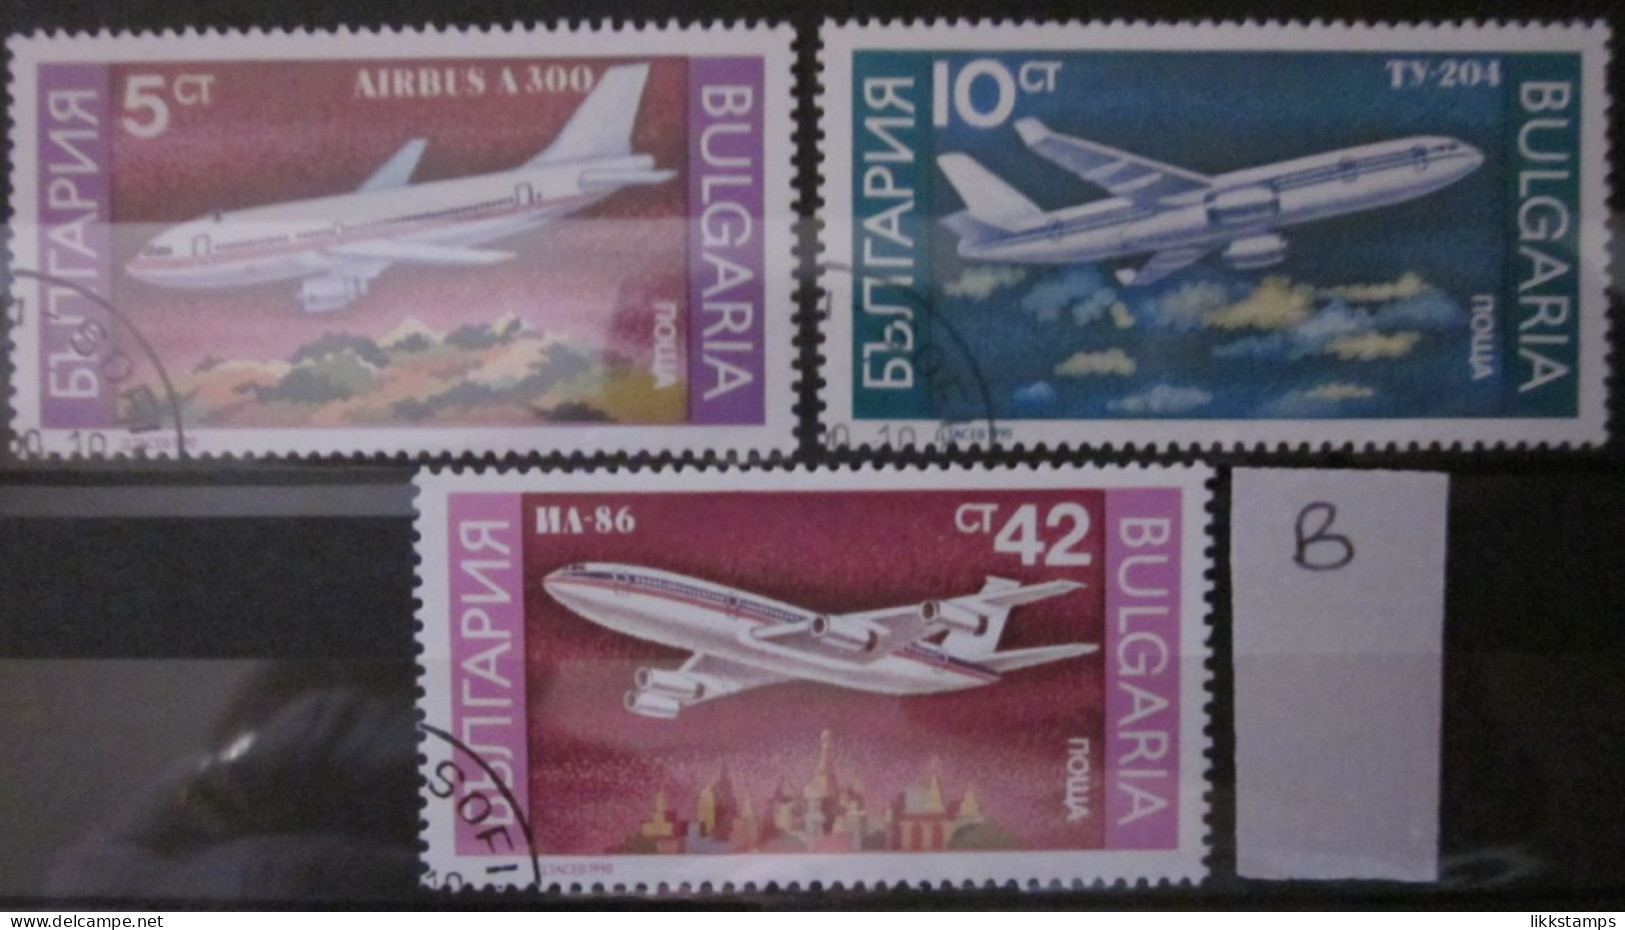 BULGARIA 1990 ~ S.G. 3705, 3706 & 3709, ~ 'LOT B' ~ AIRCRAFT. ~  VFU #02962 - Used Stamps